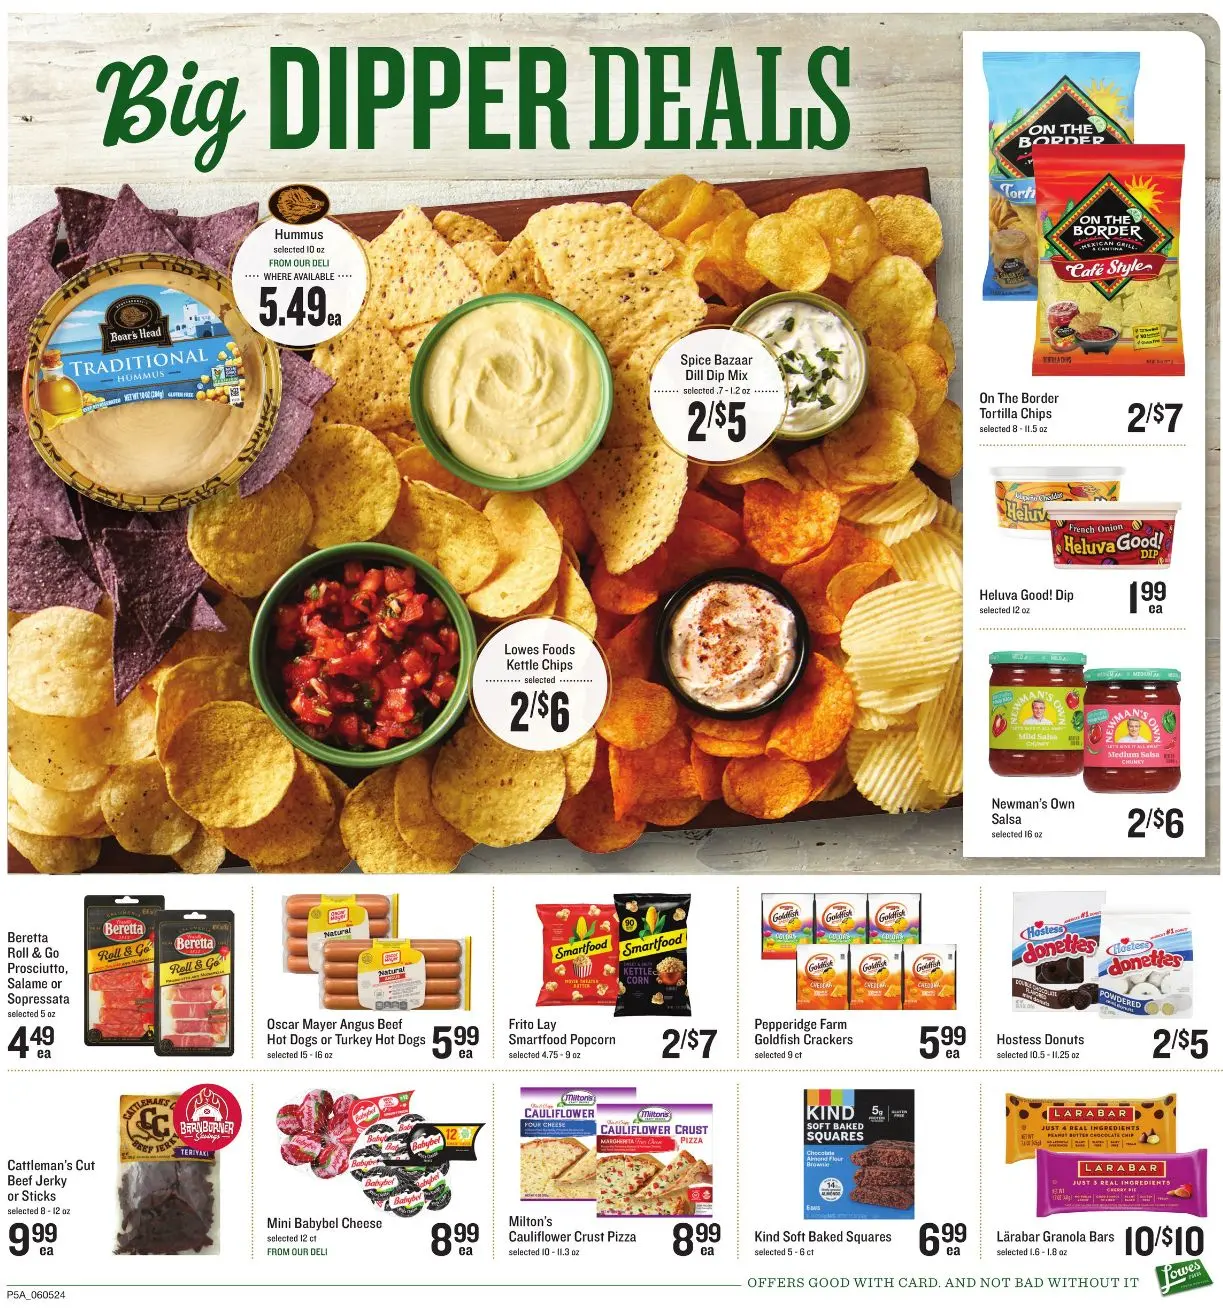 Lowes Foods July 2024 Weekly Sales, Deals, Discounts and Digital Coupons.